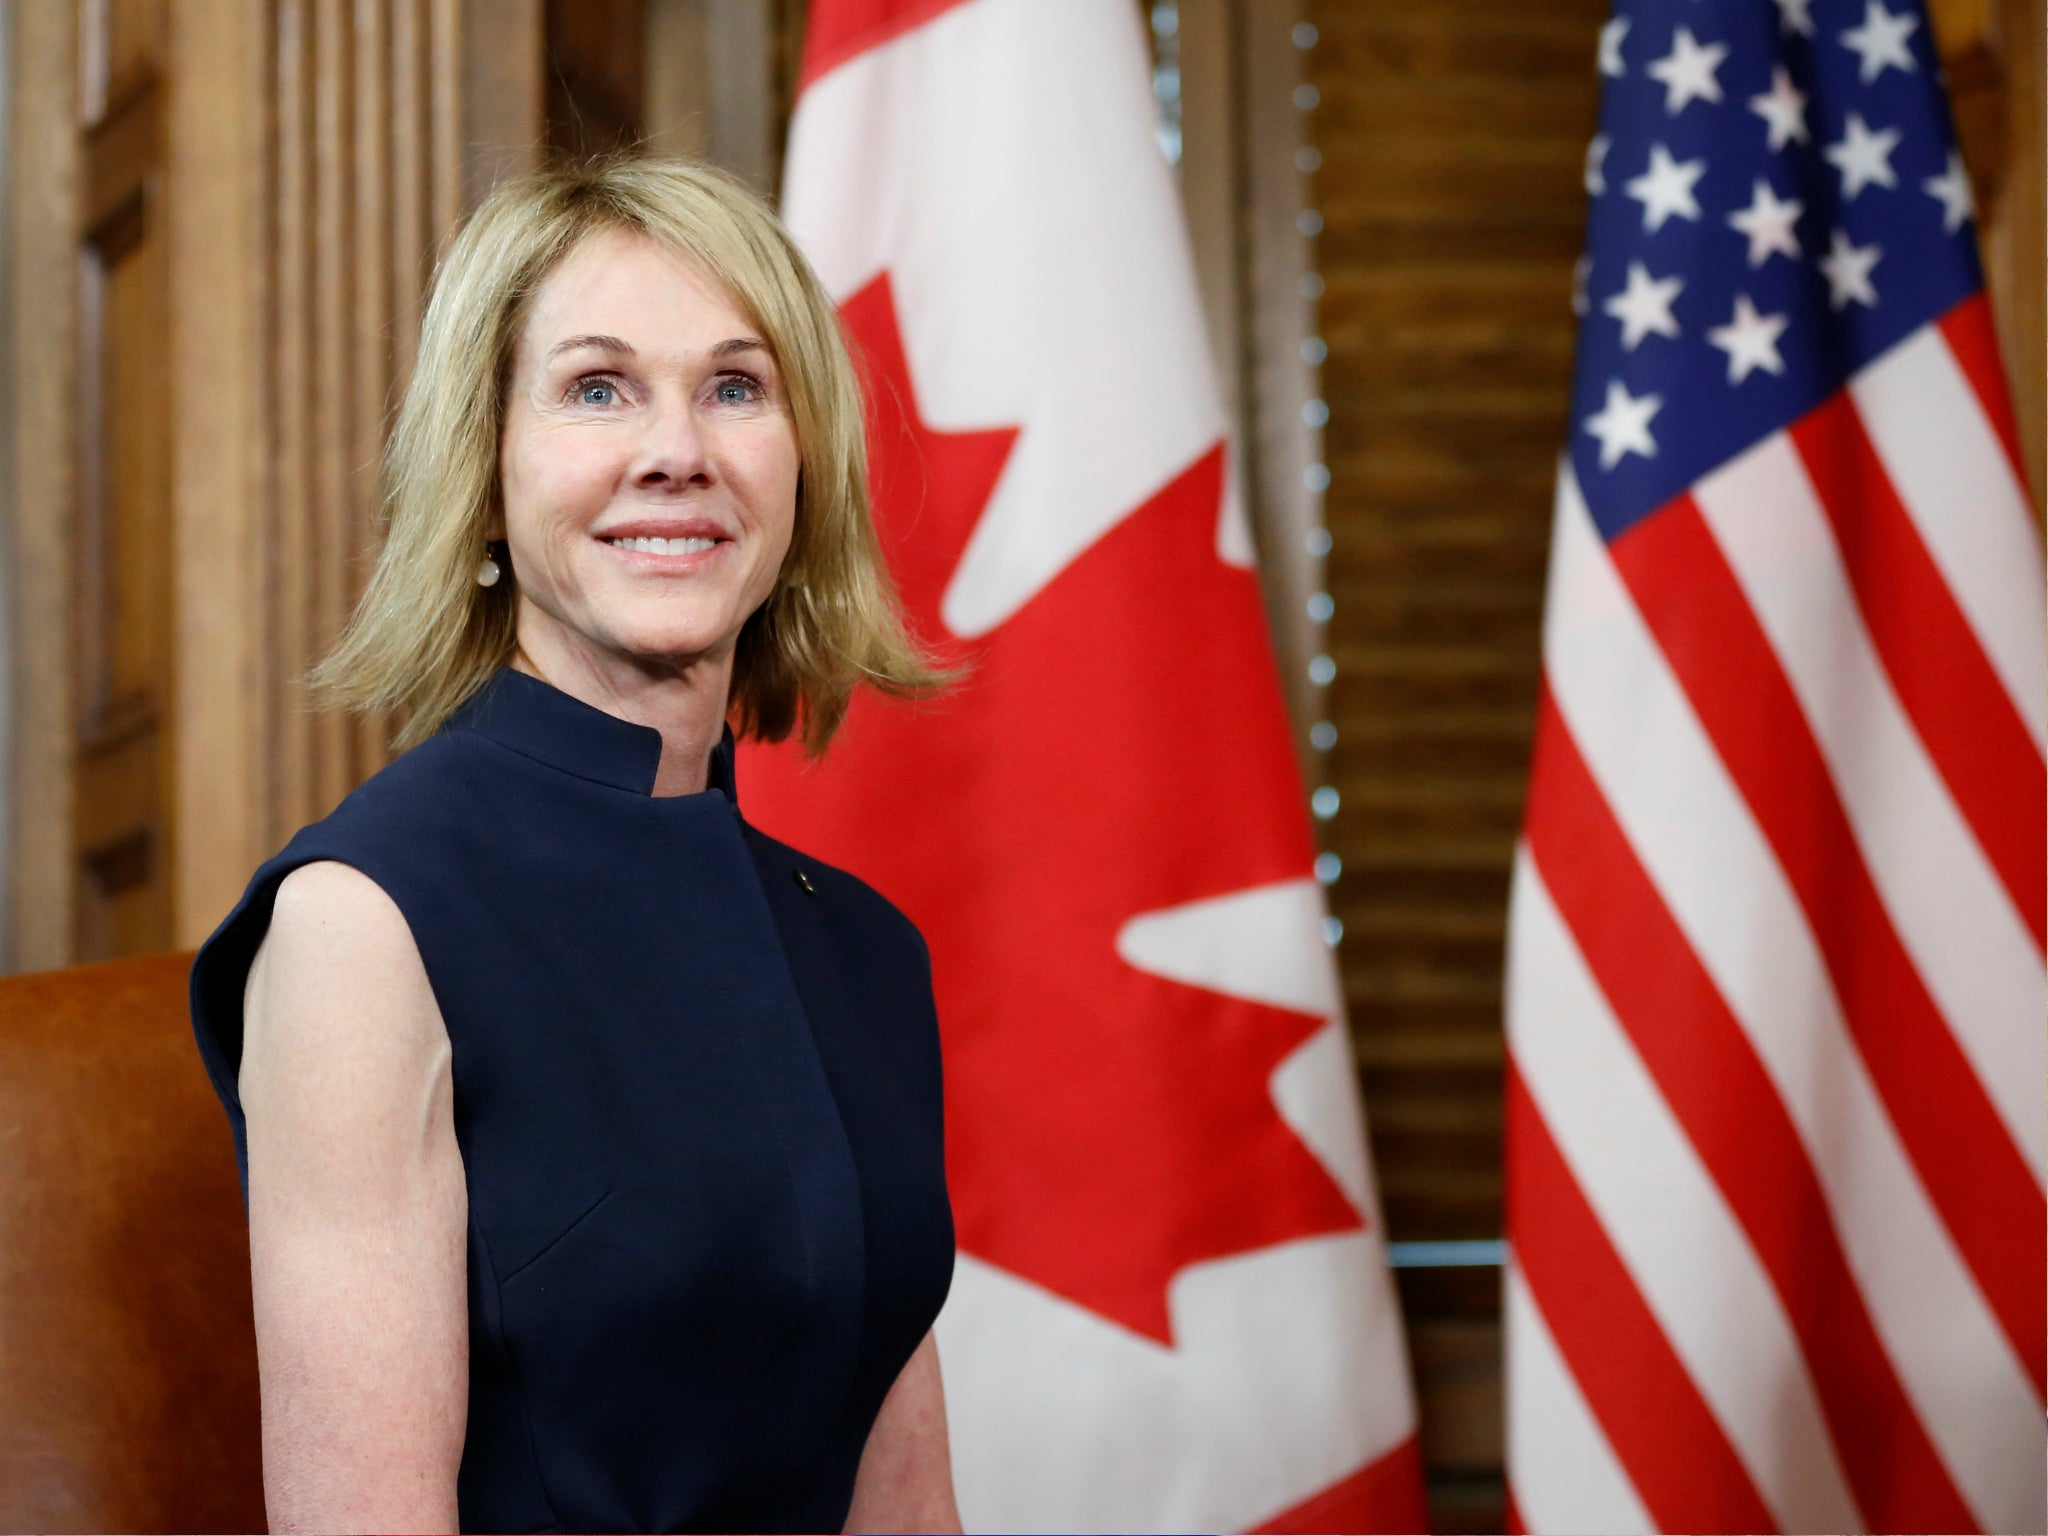 US Ambassador to Canada Kelly Craft received a threat in the mail that contained a suspicious white powder just as trade tensions between the two countries are high